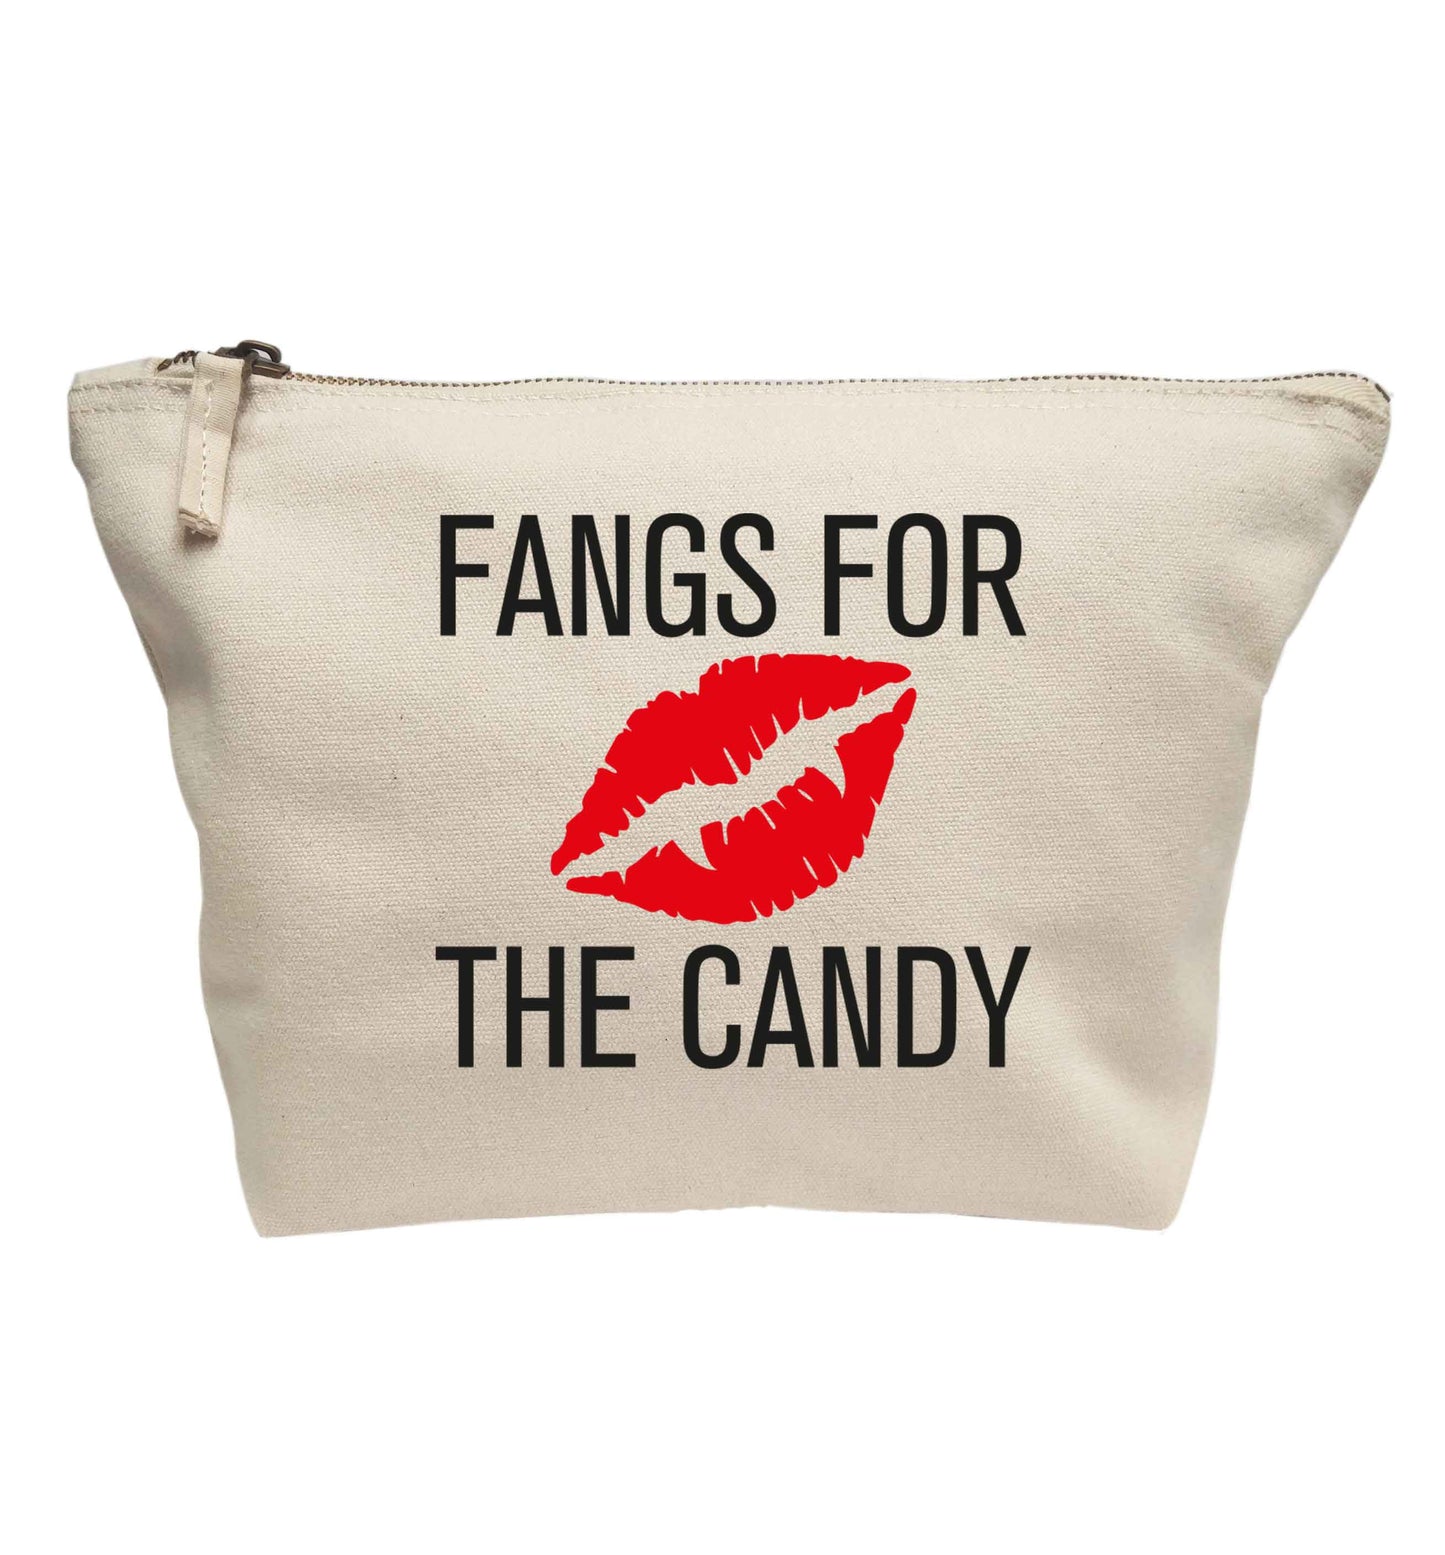 Fangs for the candy | Makeup / wash bag